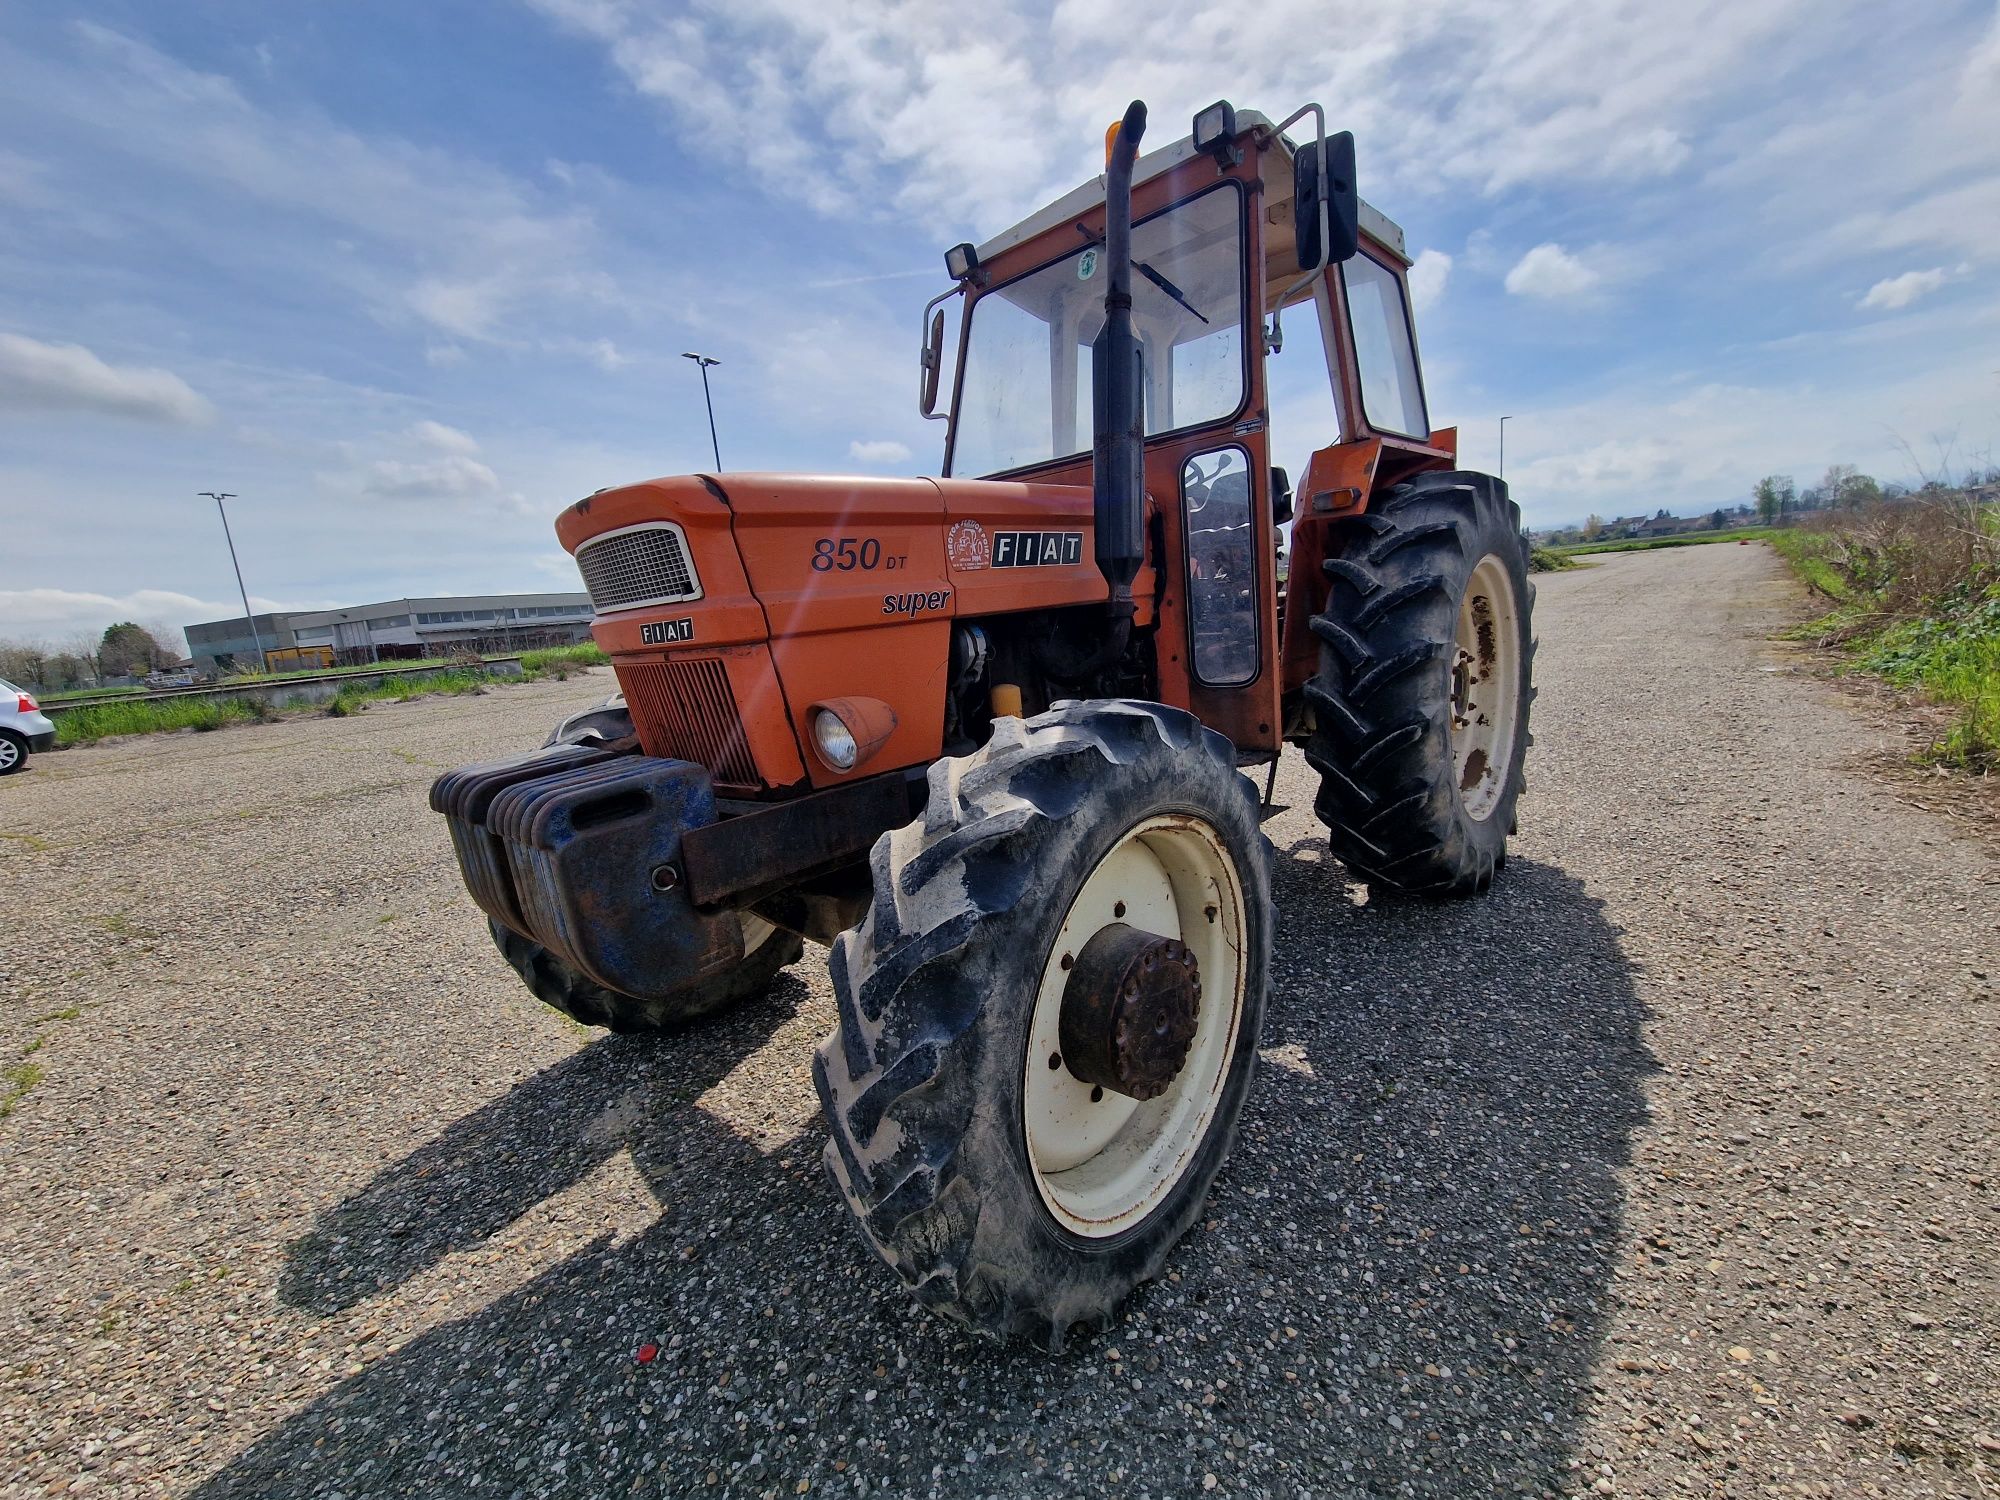 Tractor om 850 4x4